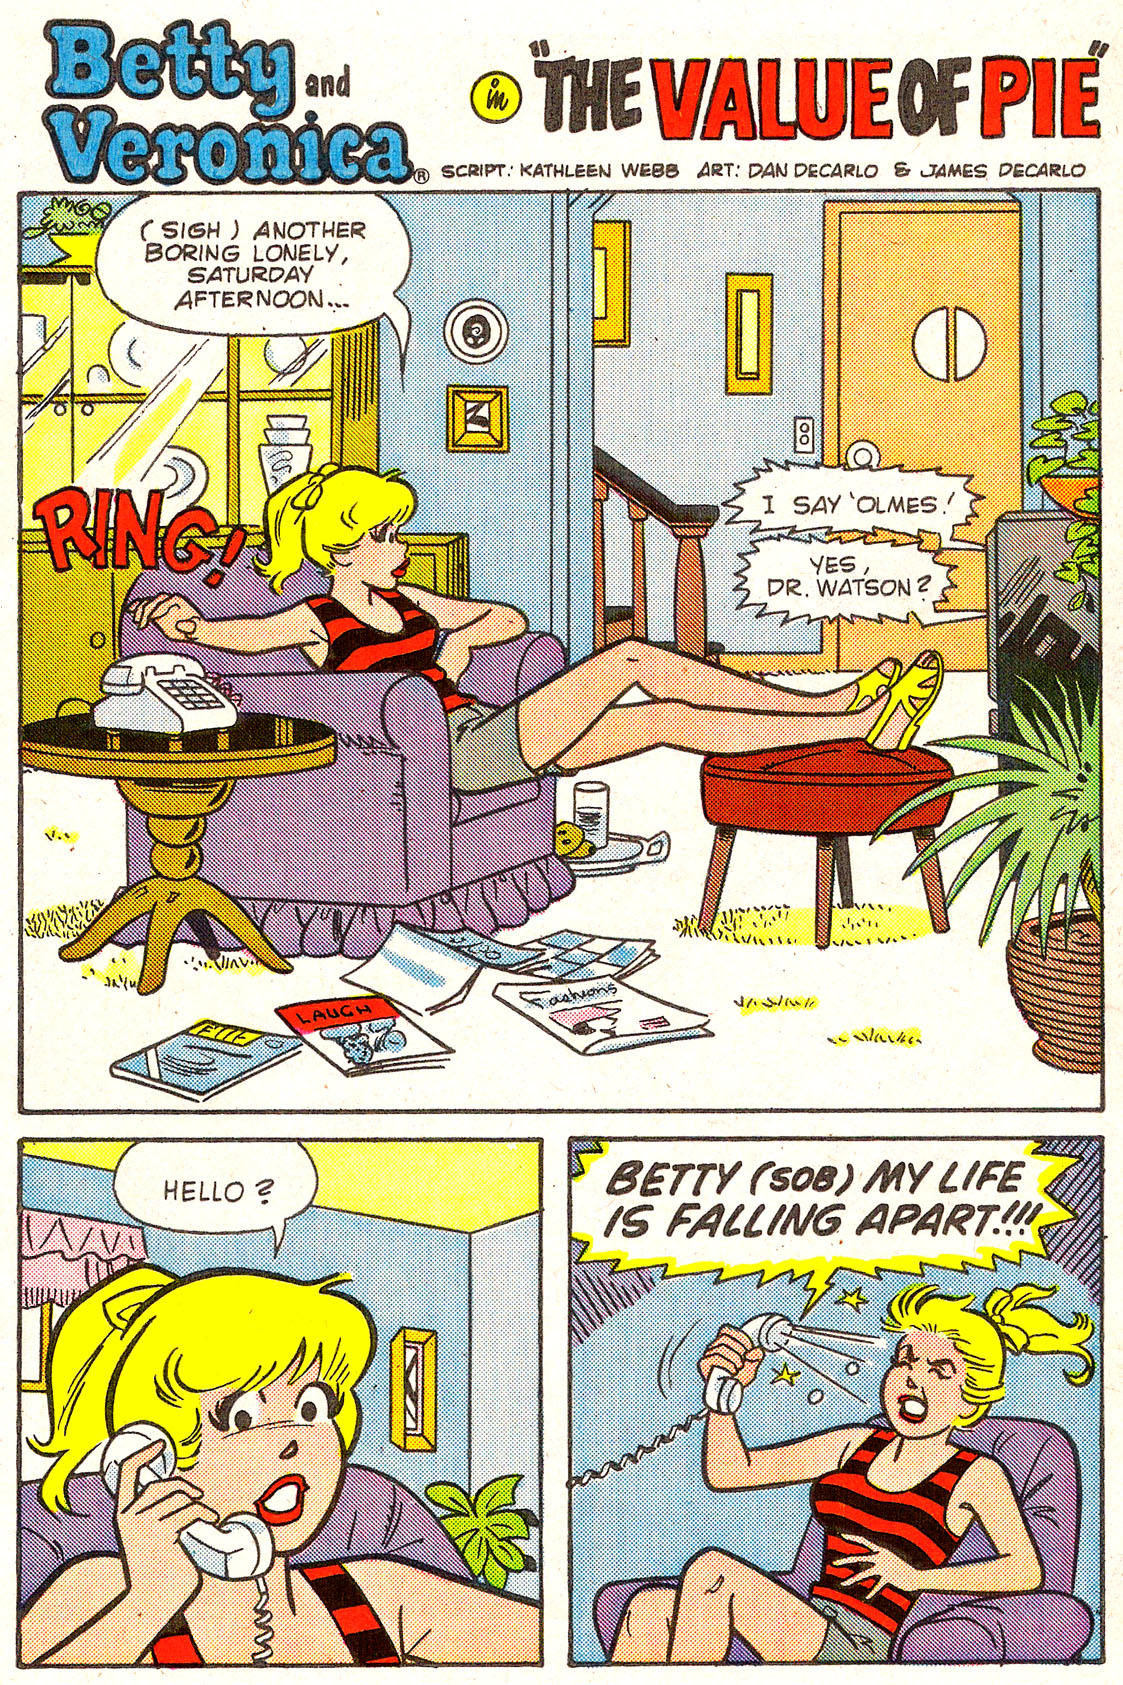 Read online Archie's Girls Betty and Veronica comic -  Issue #345 - 19